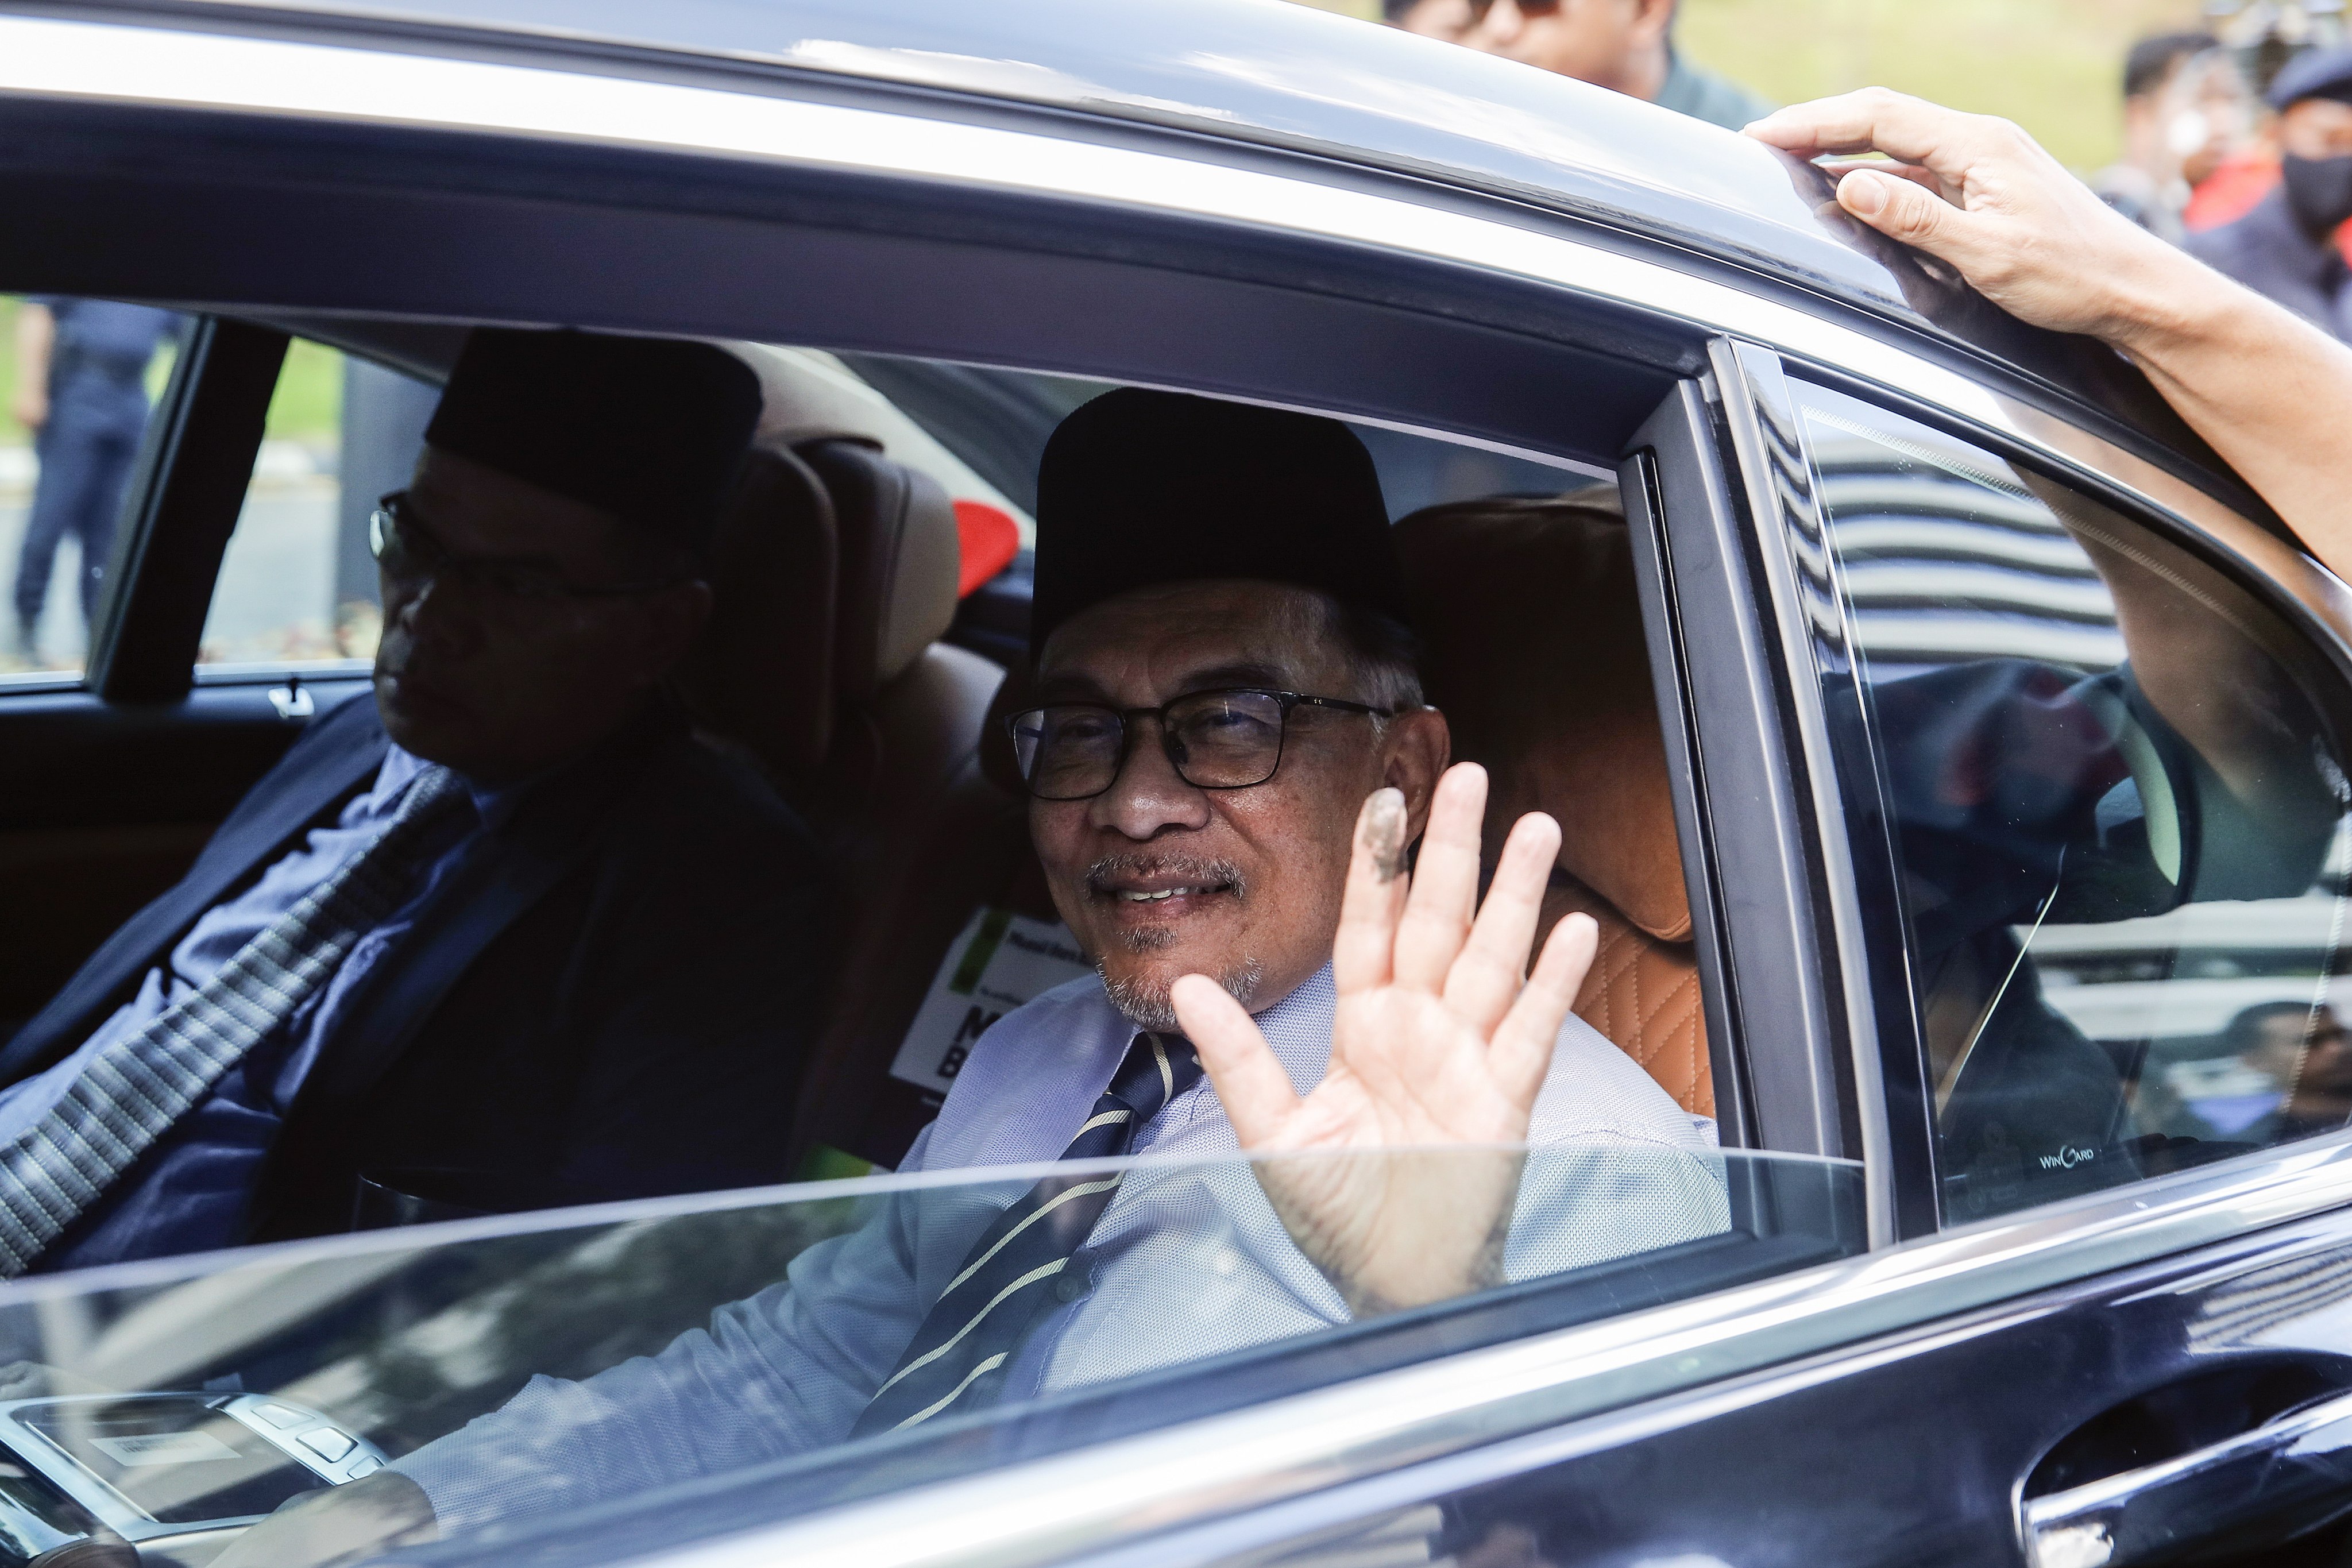 Anwar Ibrahim arrives at the national palace to meet the king on Tuesday. Photo: EPA-EFE